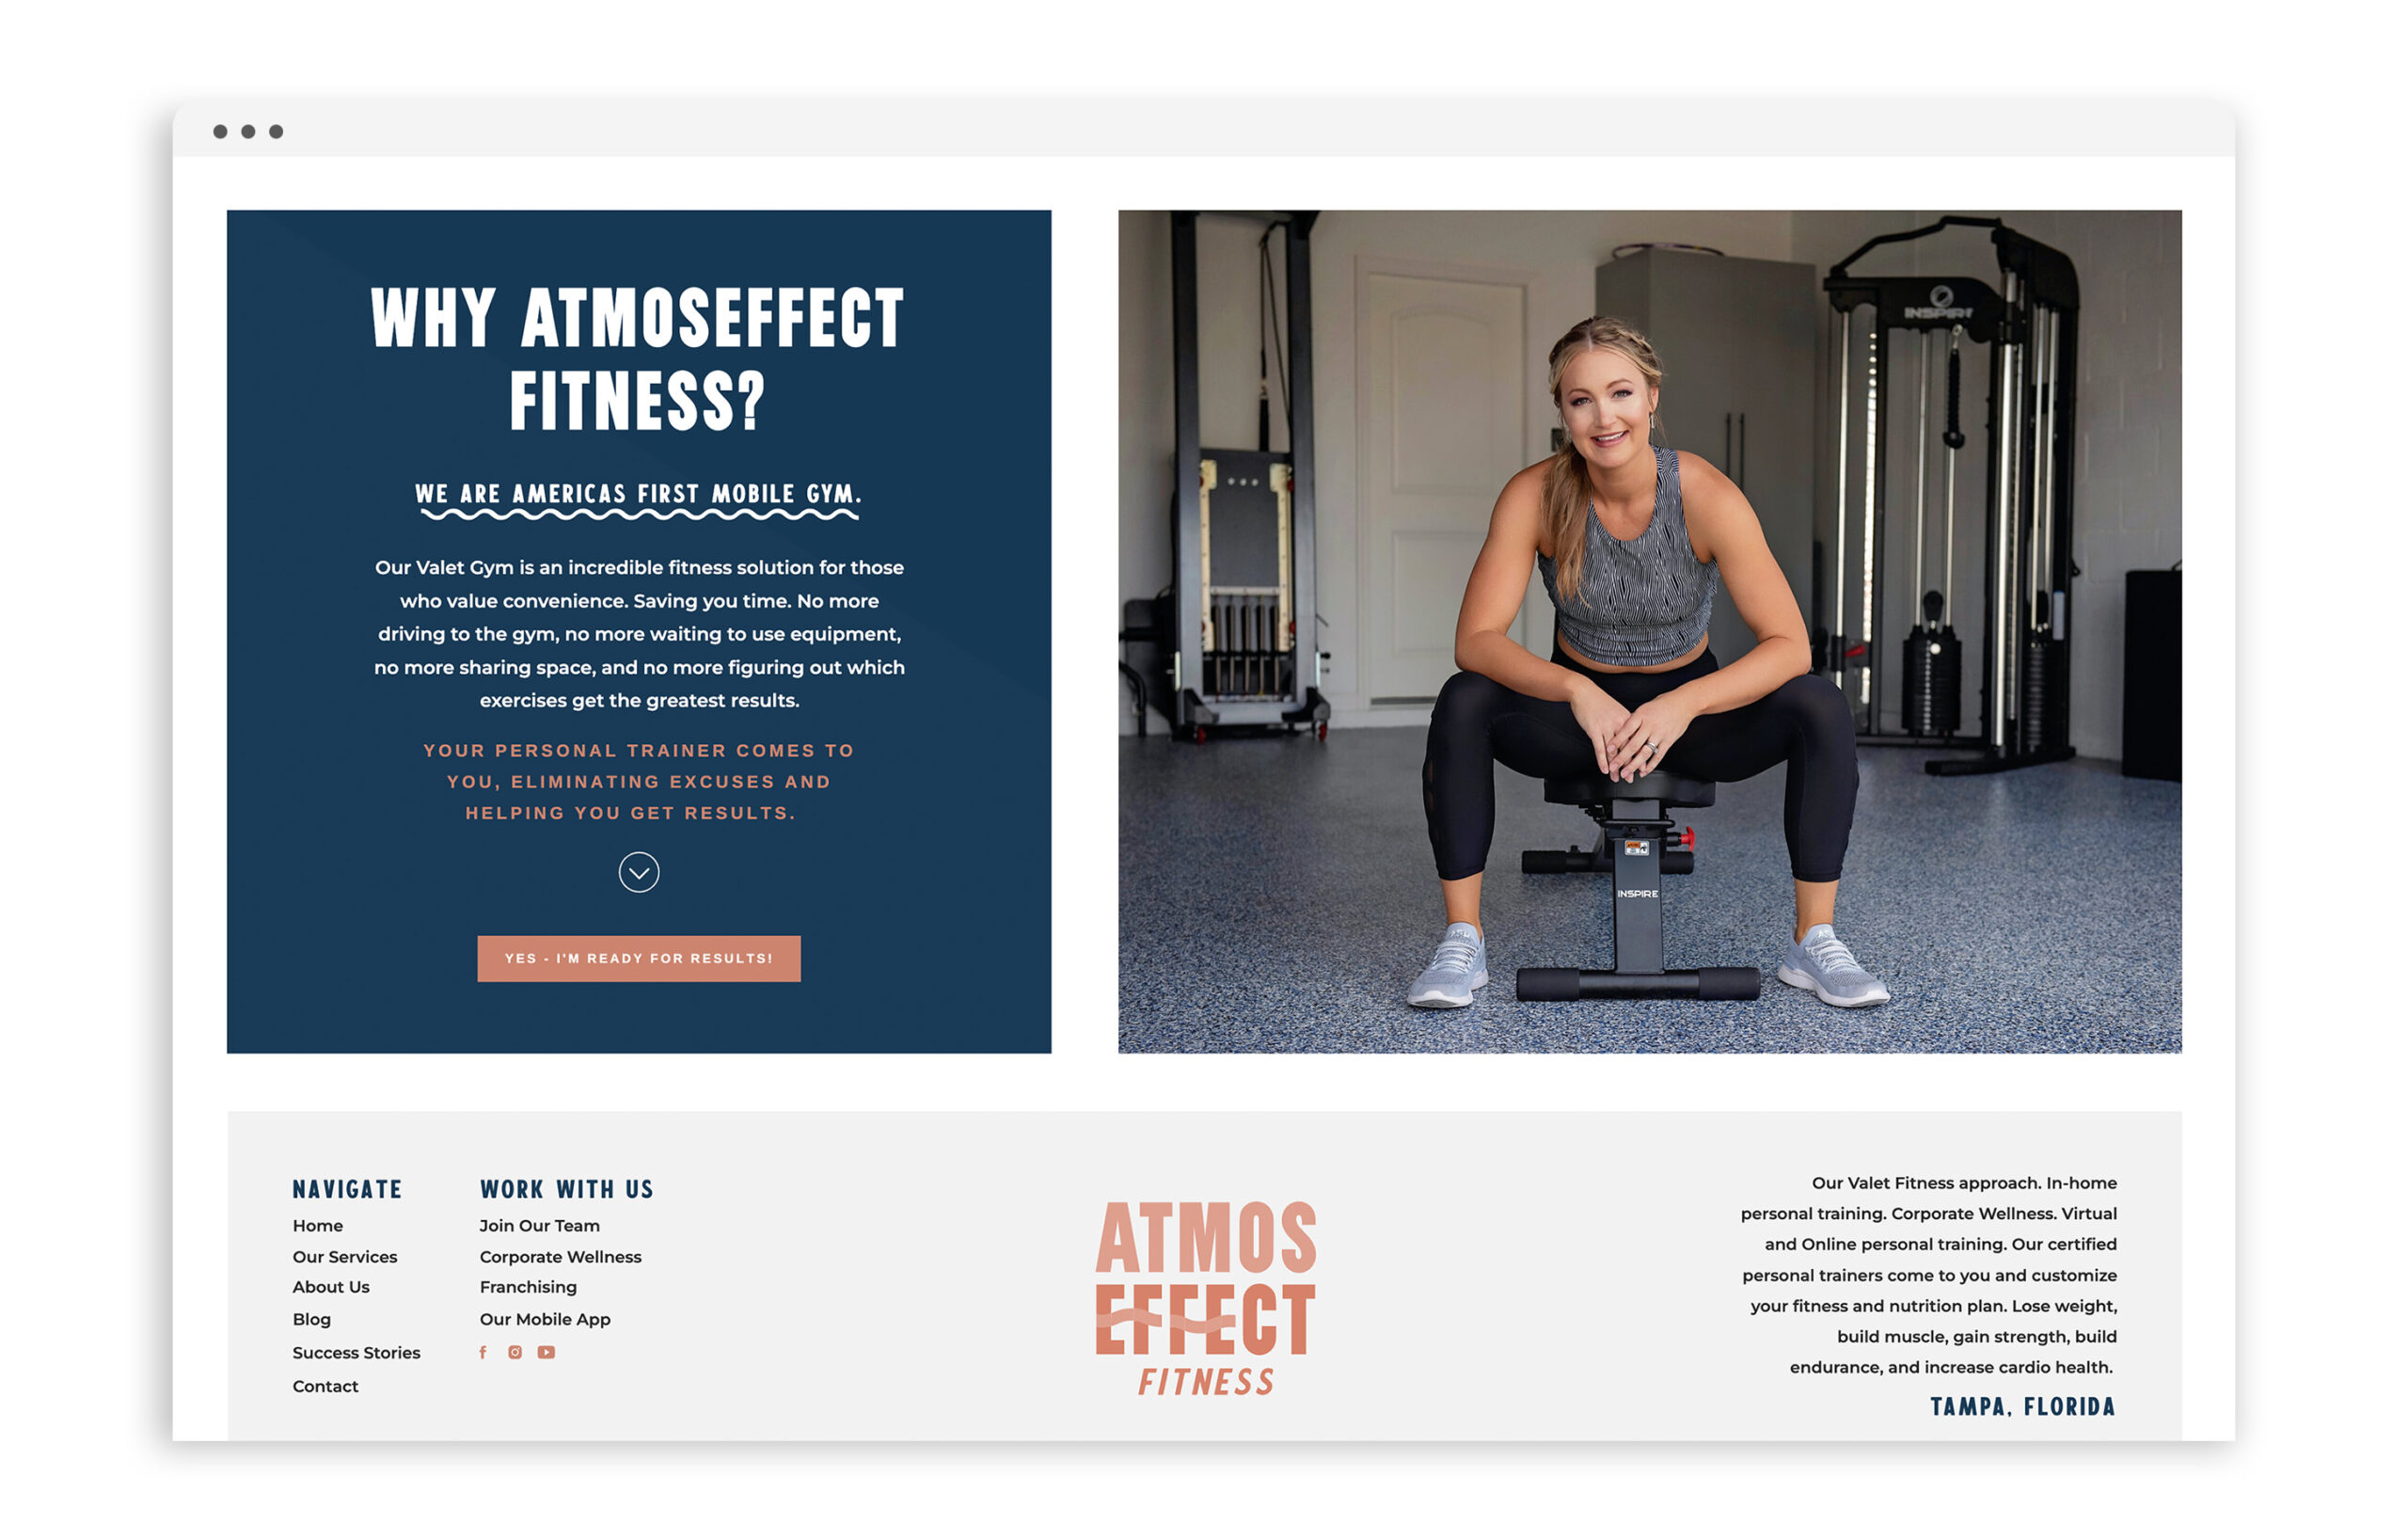 AtmosEffect Fitness Tampa Florida valet gym mobile gym mobile fitness one on one personal training small group virtual corporate Kelsey Bryant Certified Personal Trainers - 8